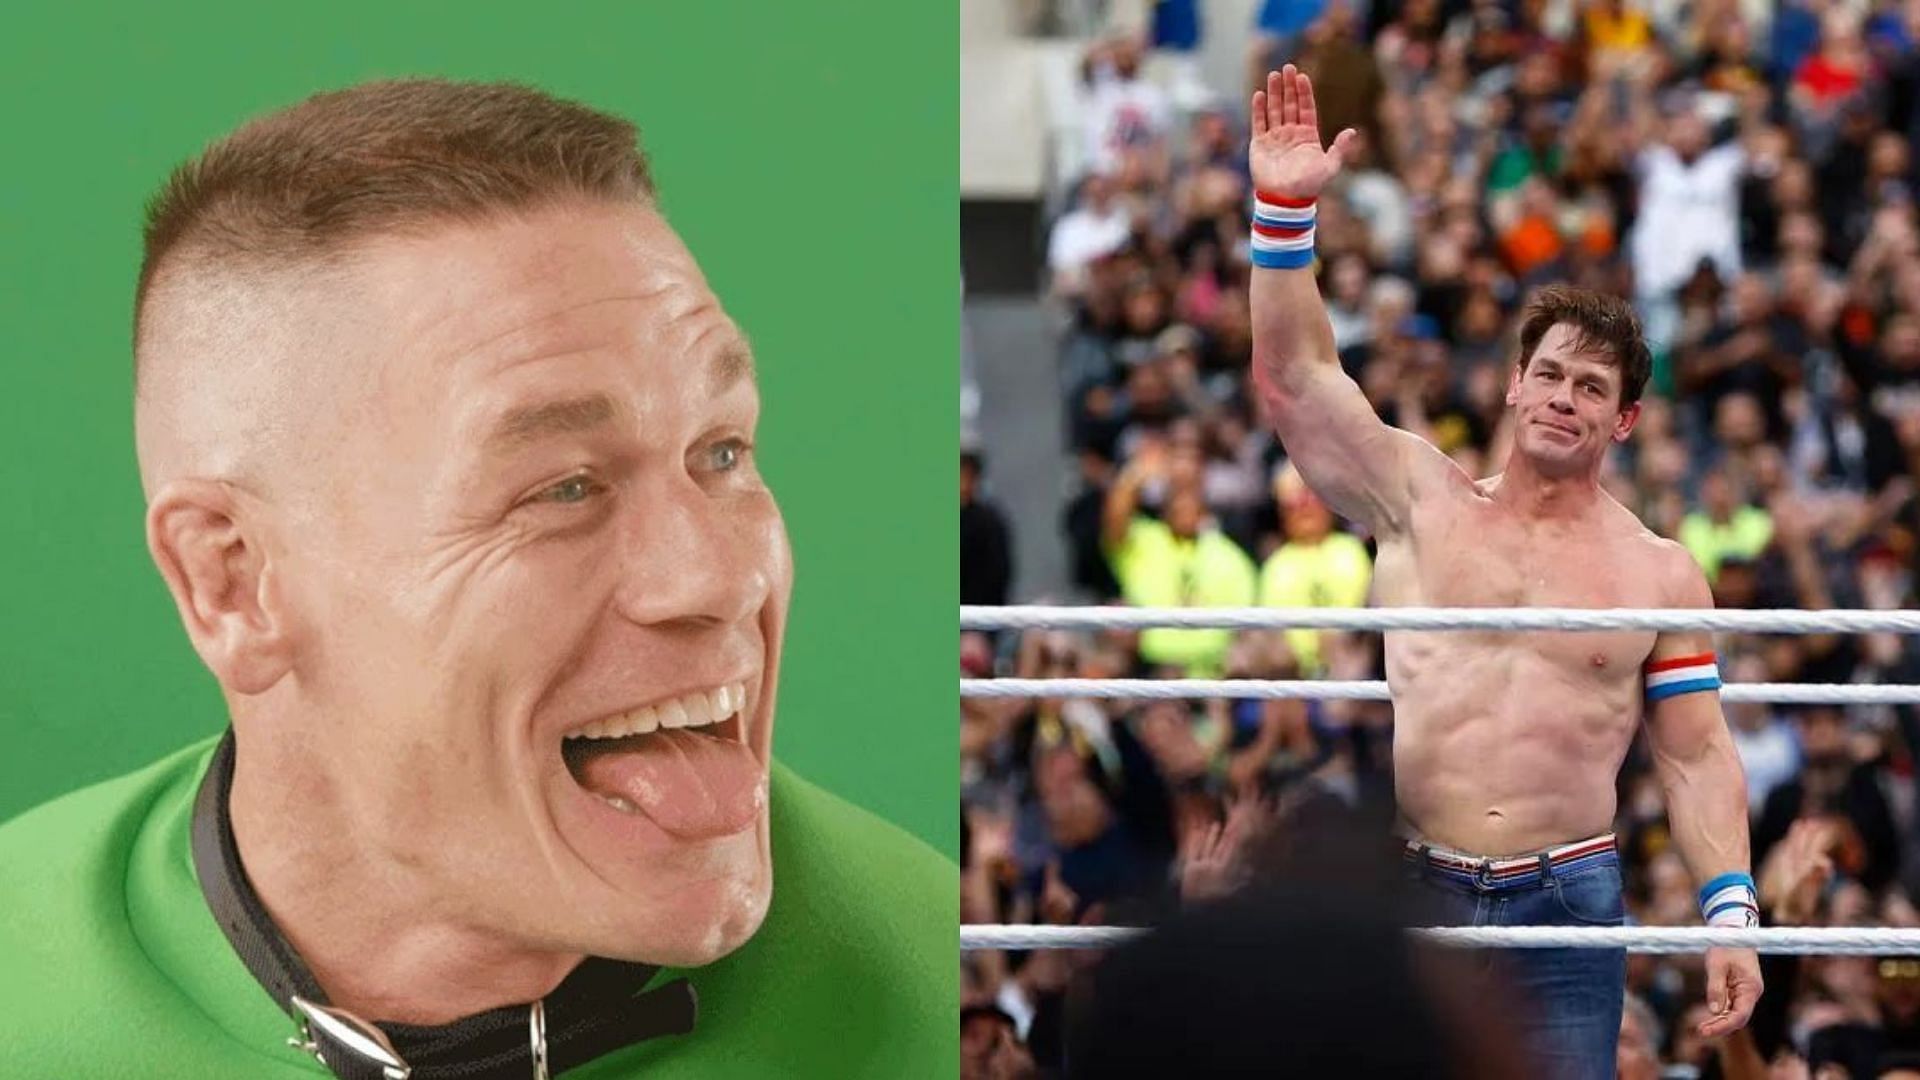 John Cena is currently focusing on his ventures outside of professional wrestling after his latest WWE run